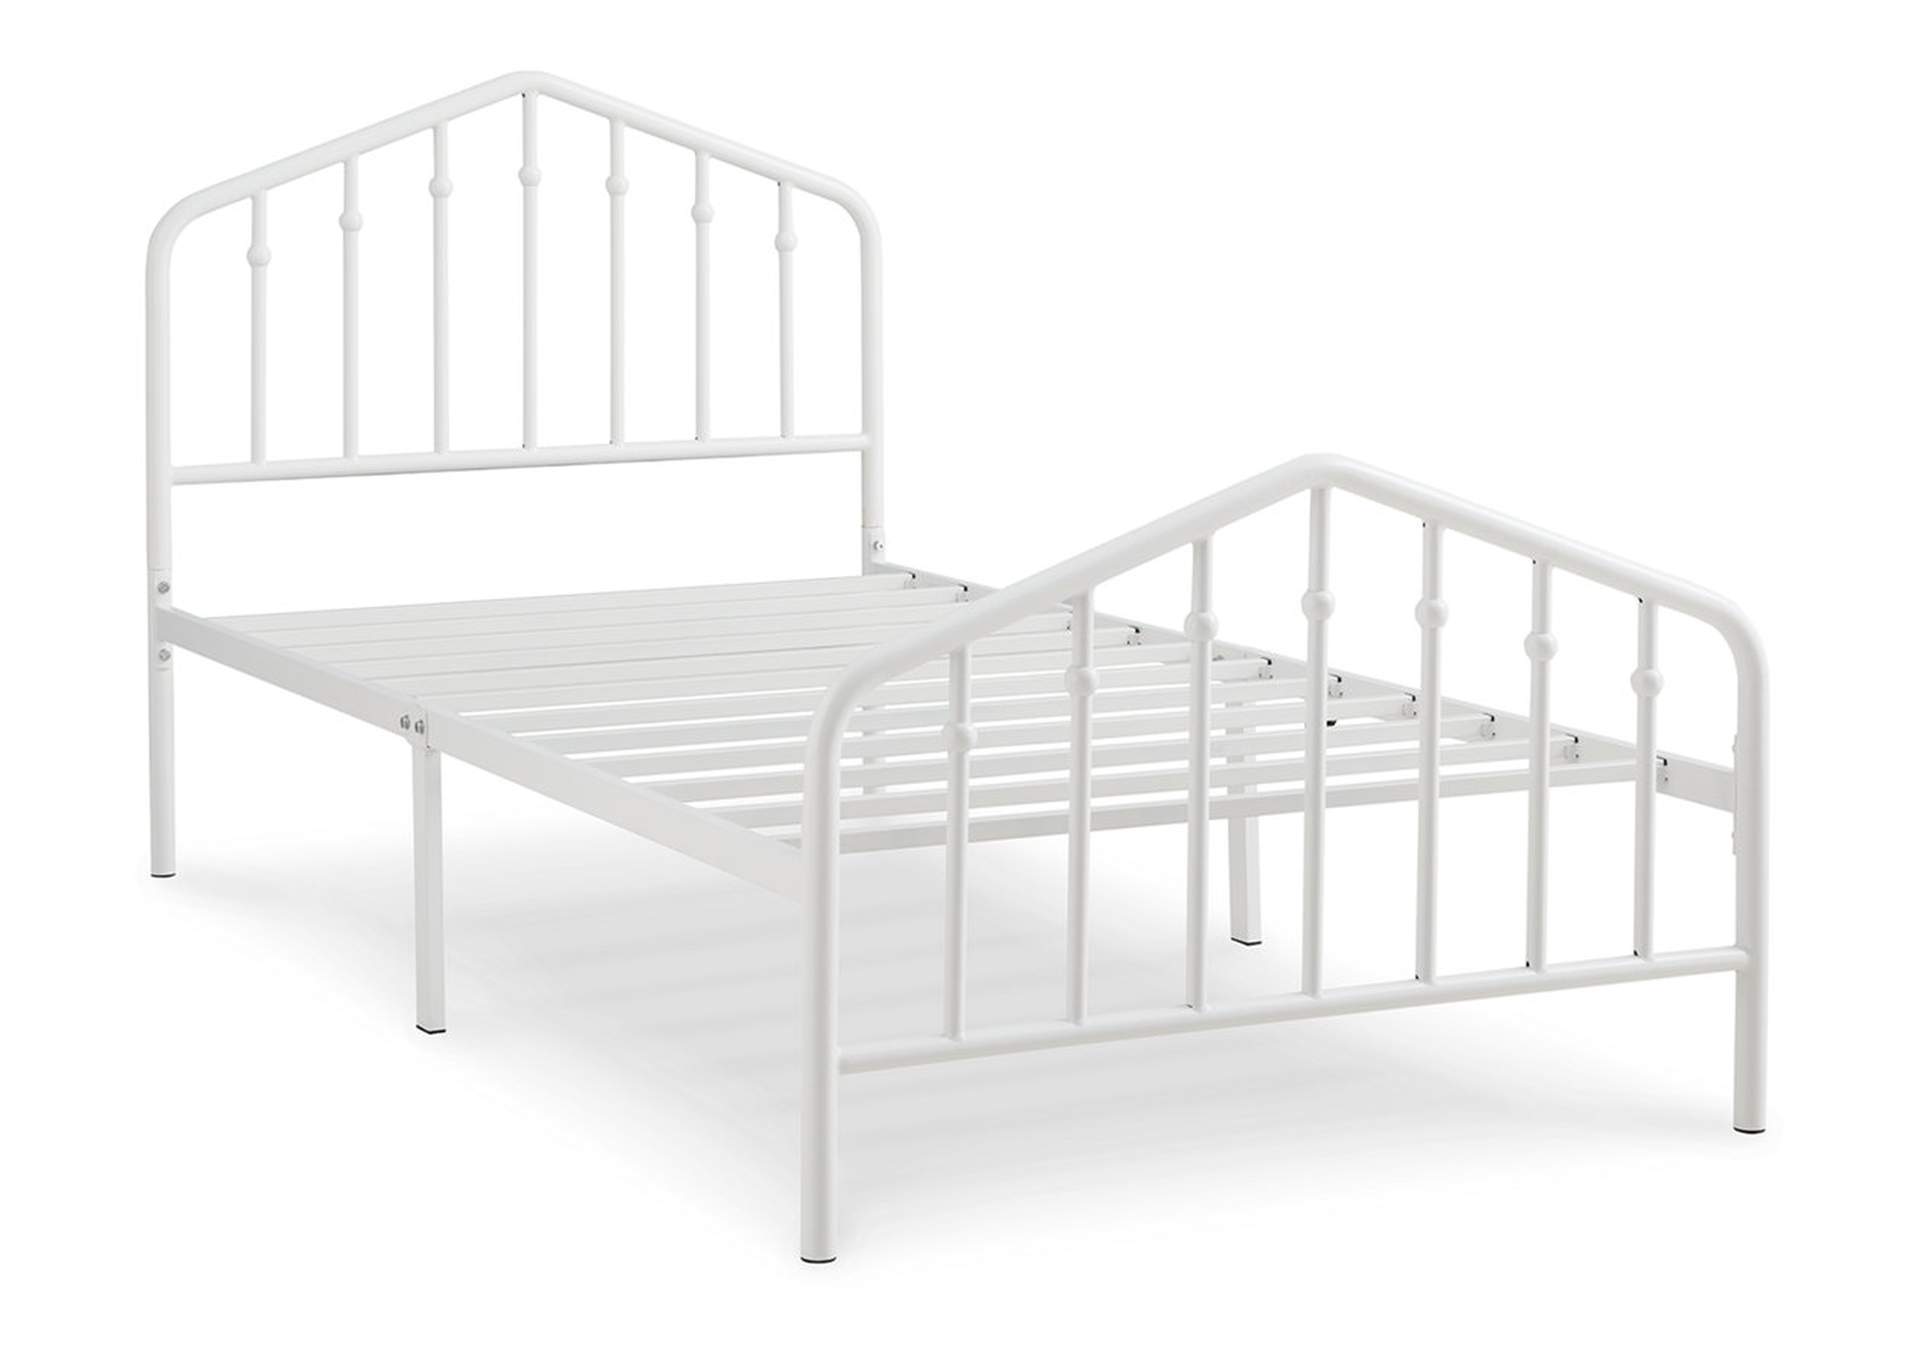 Trentlore Twin Metal Bed,Signature Design By Ashley